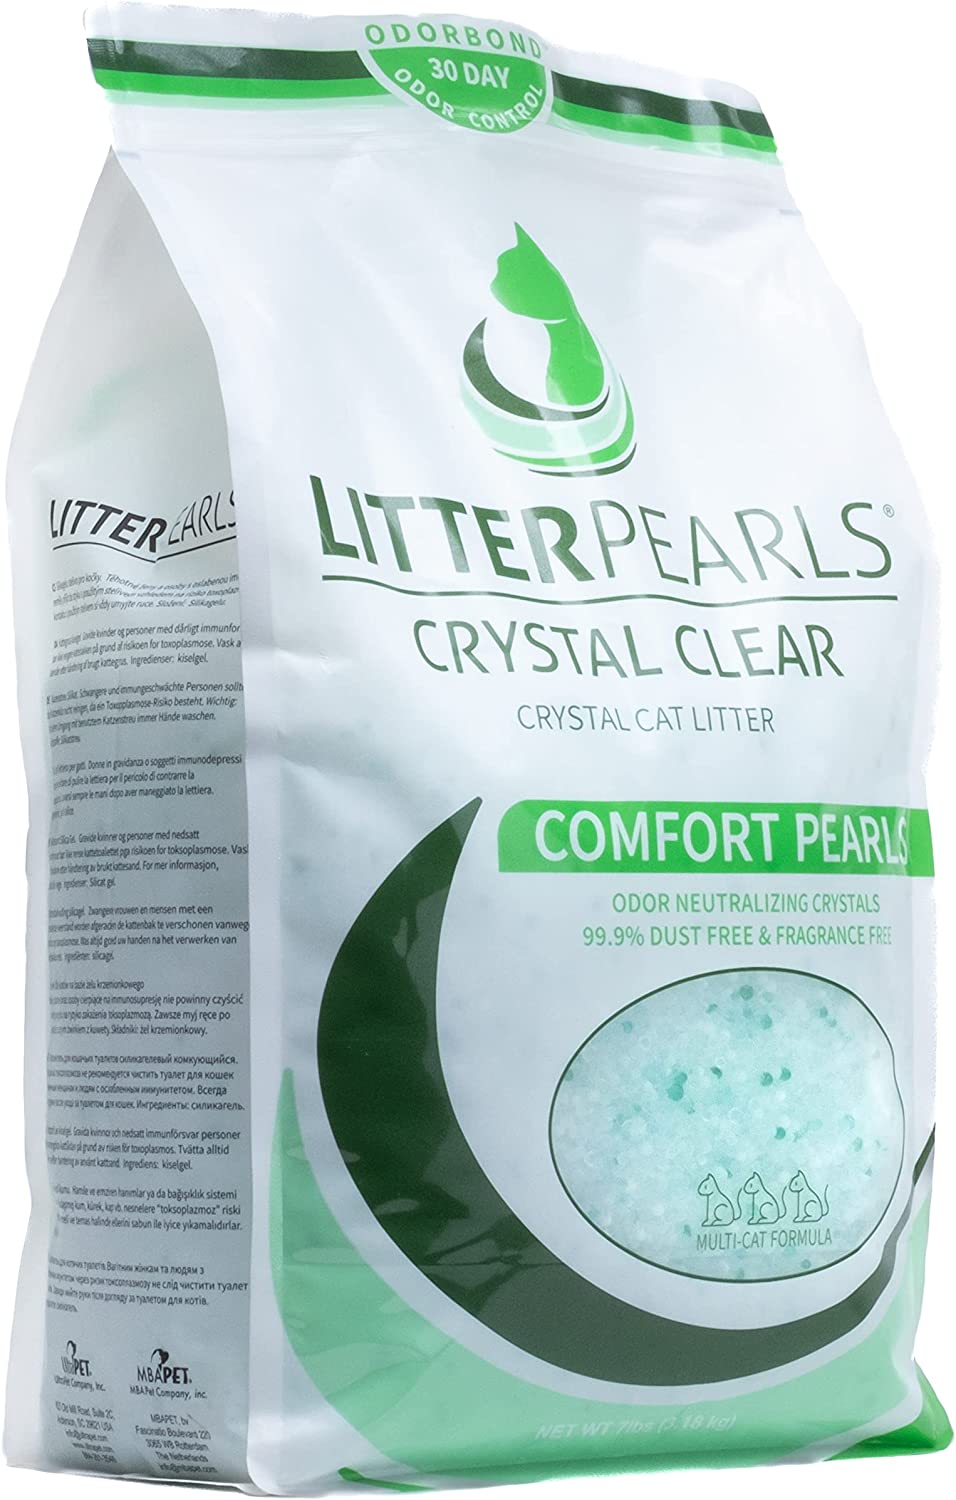 Litter Pearls Crystal Clear Unscented Non-Clumping Crystal Cat Litter with Odorbond